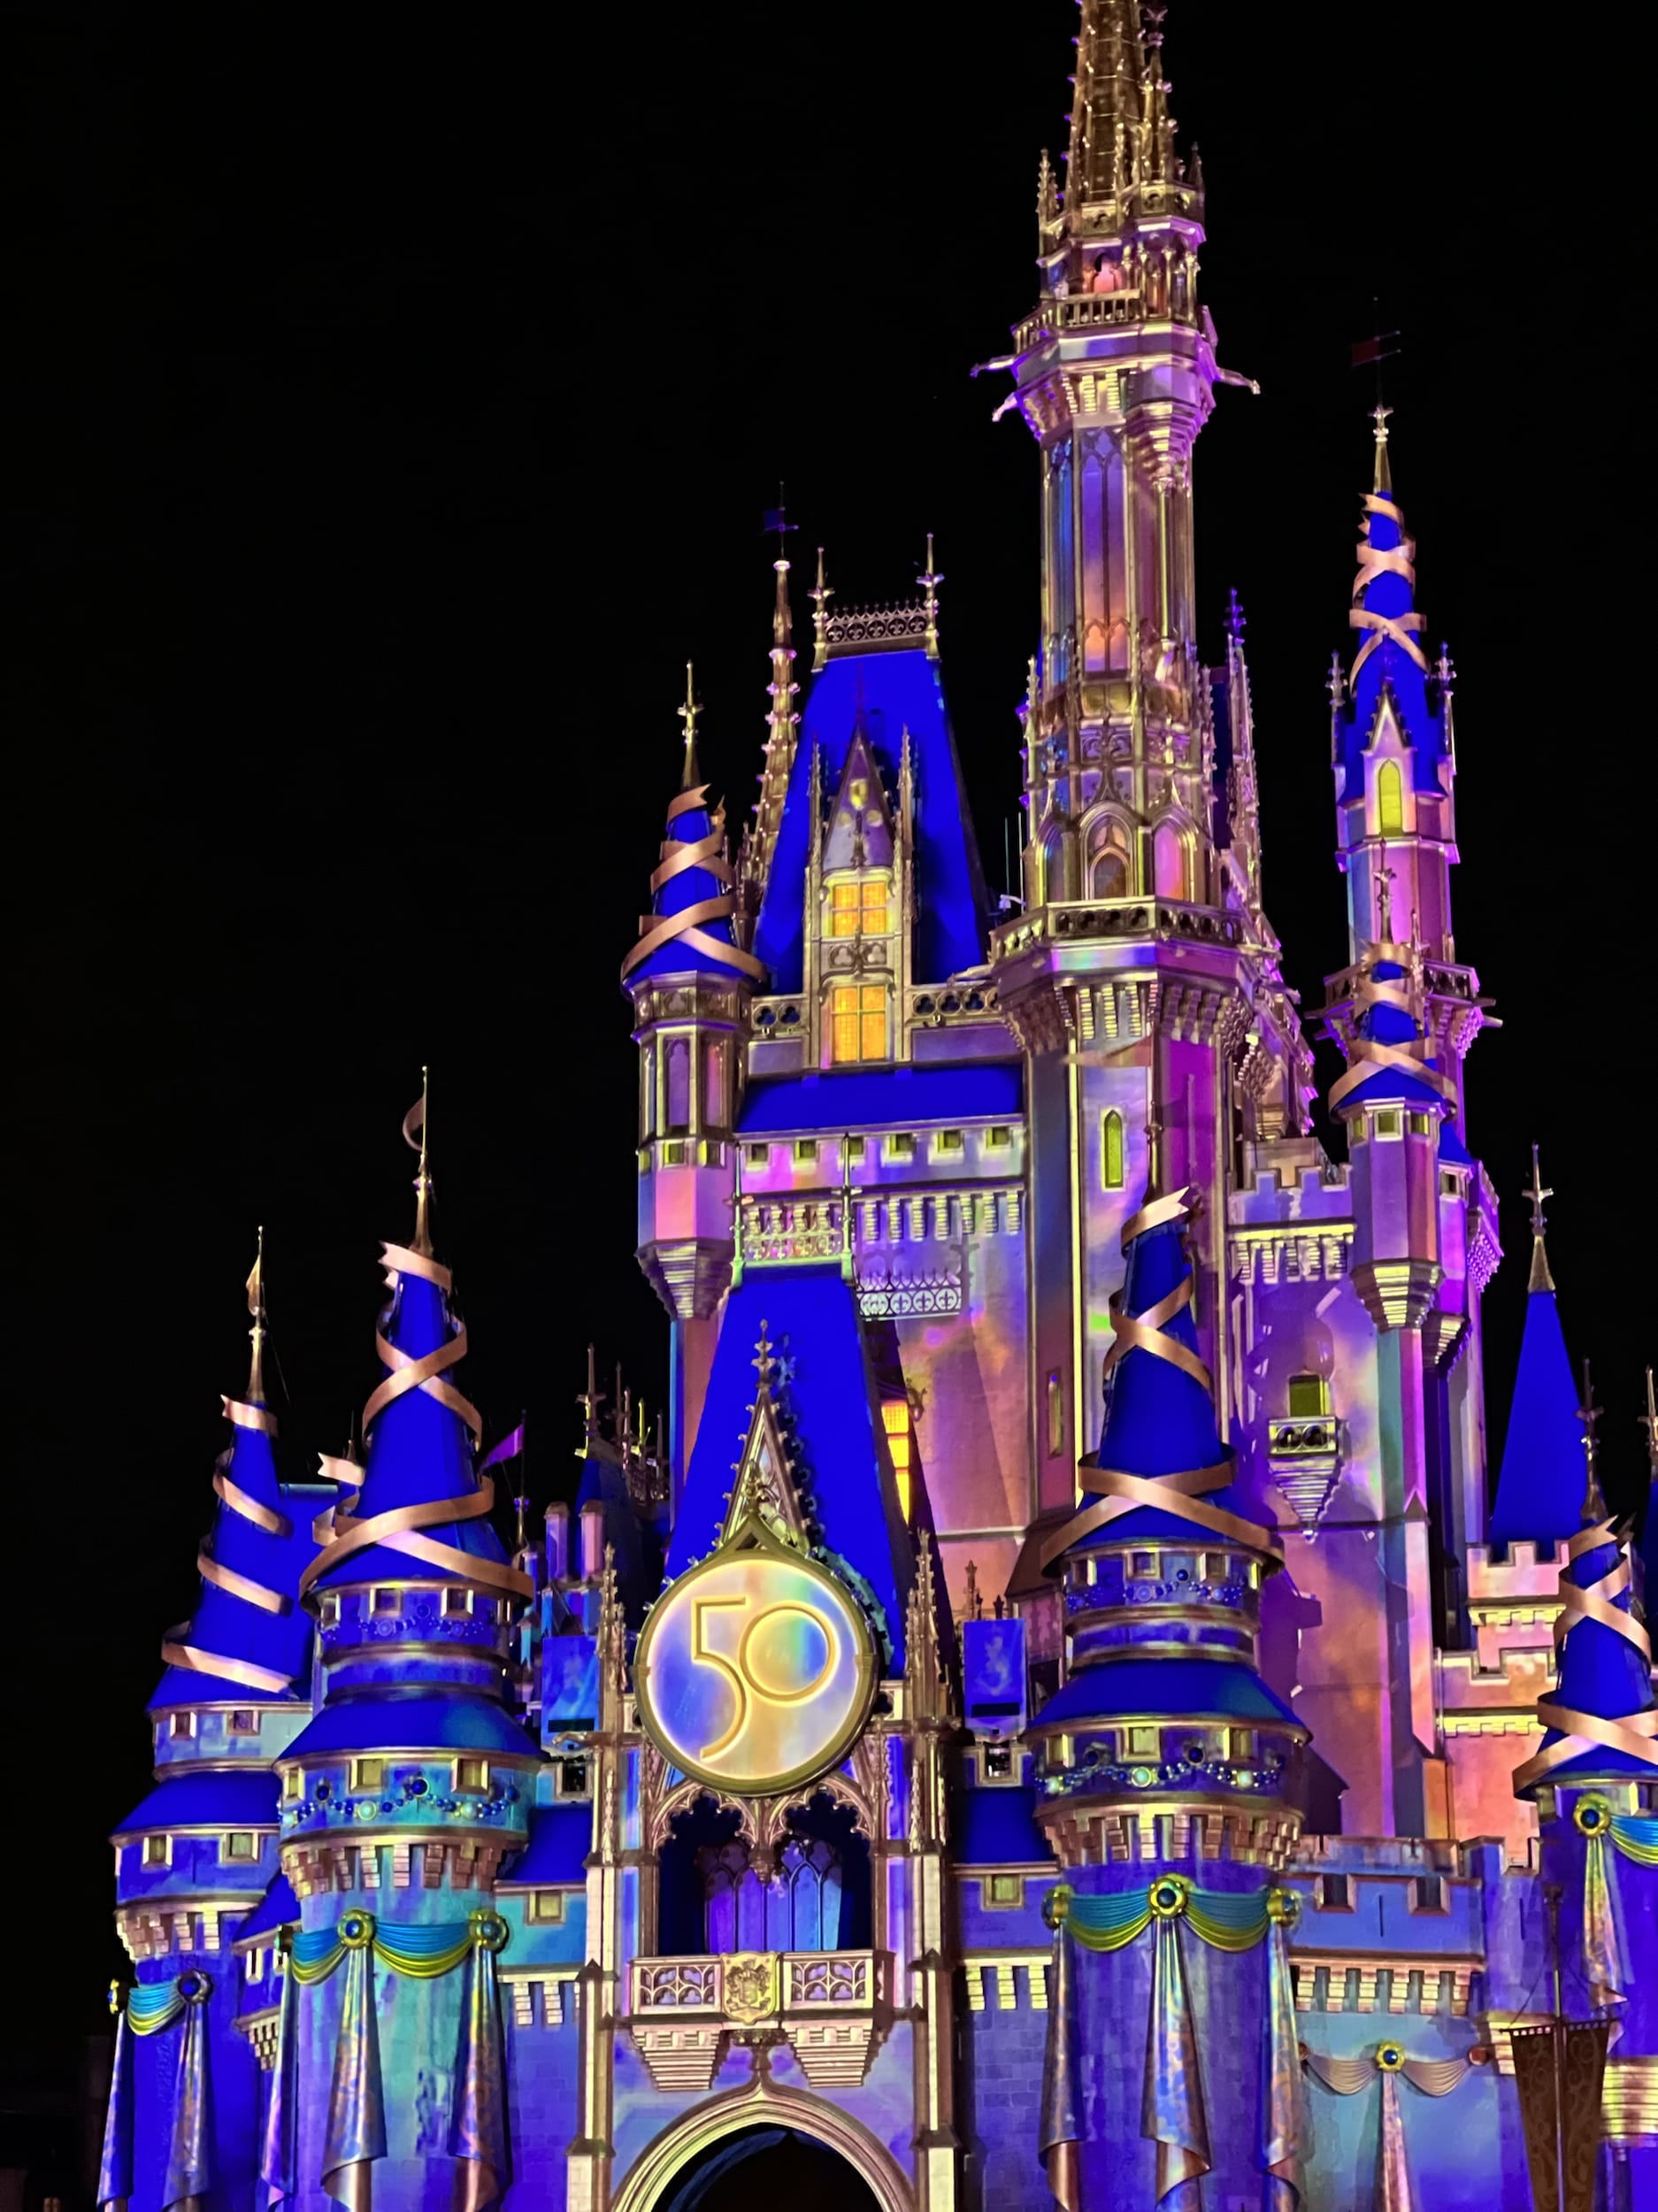 Cinderella's castle lit up at night during Disney's 50th anniversary celebration